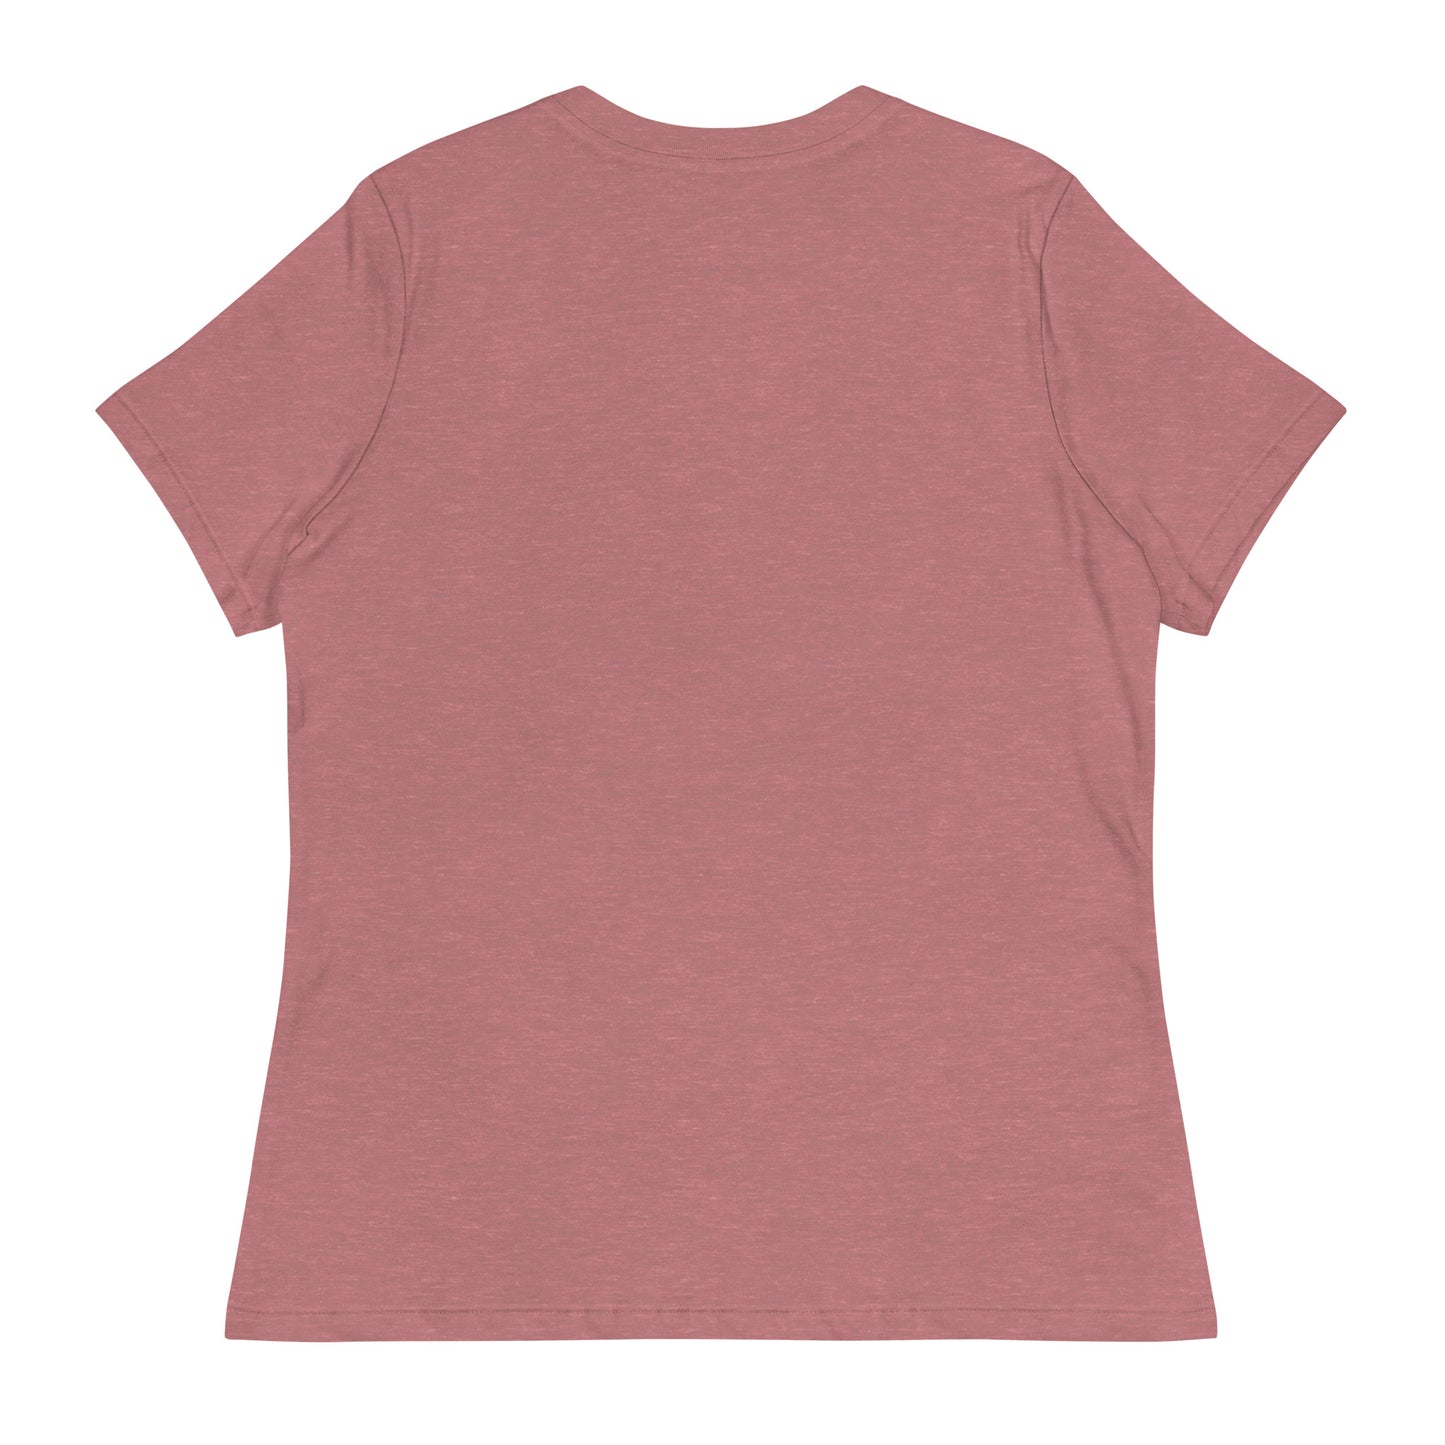 Juicy Scoop Stacked Women's Relaxed T-Shirt